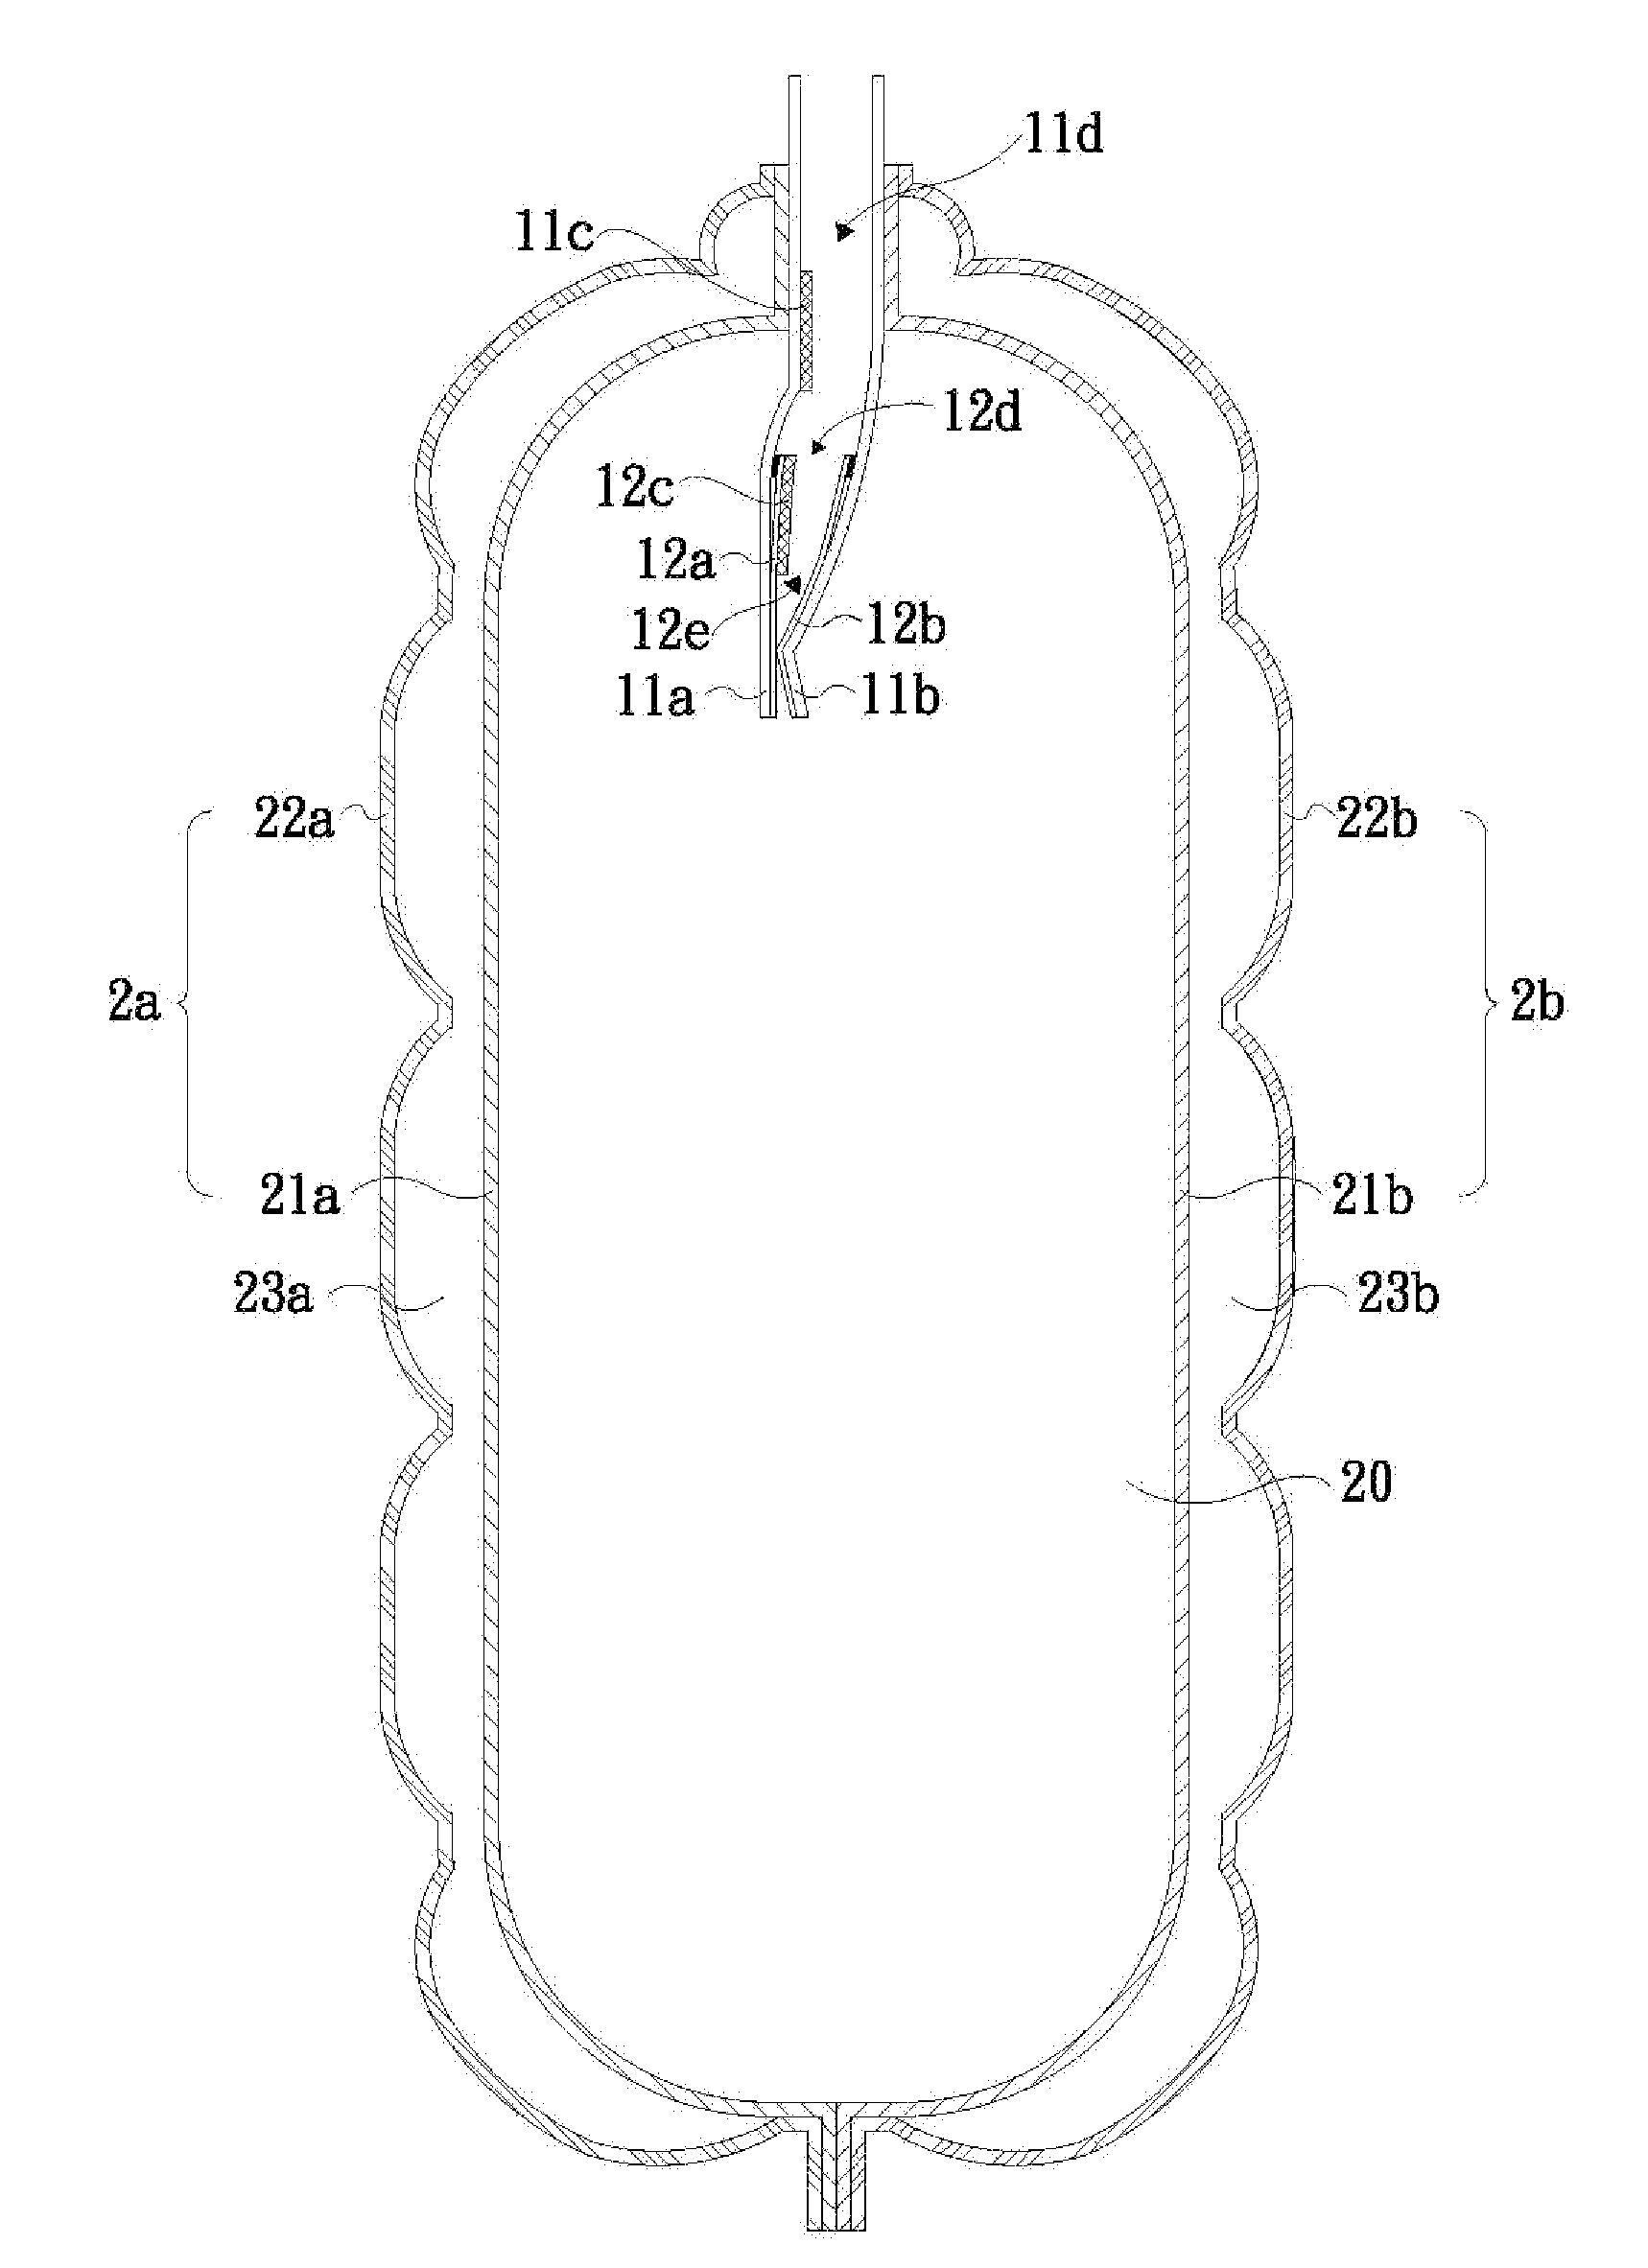 Air enlcosure and check value thereof capable of being filled with high pressure air